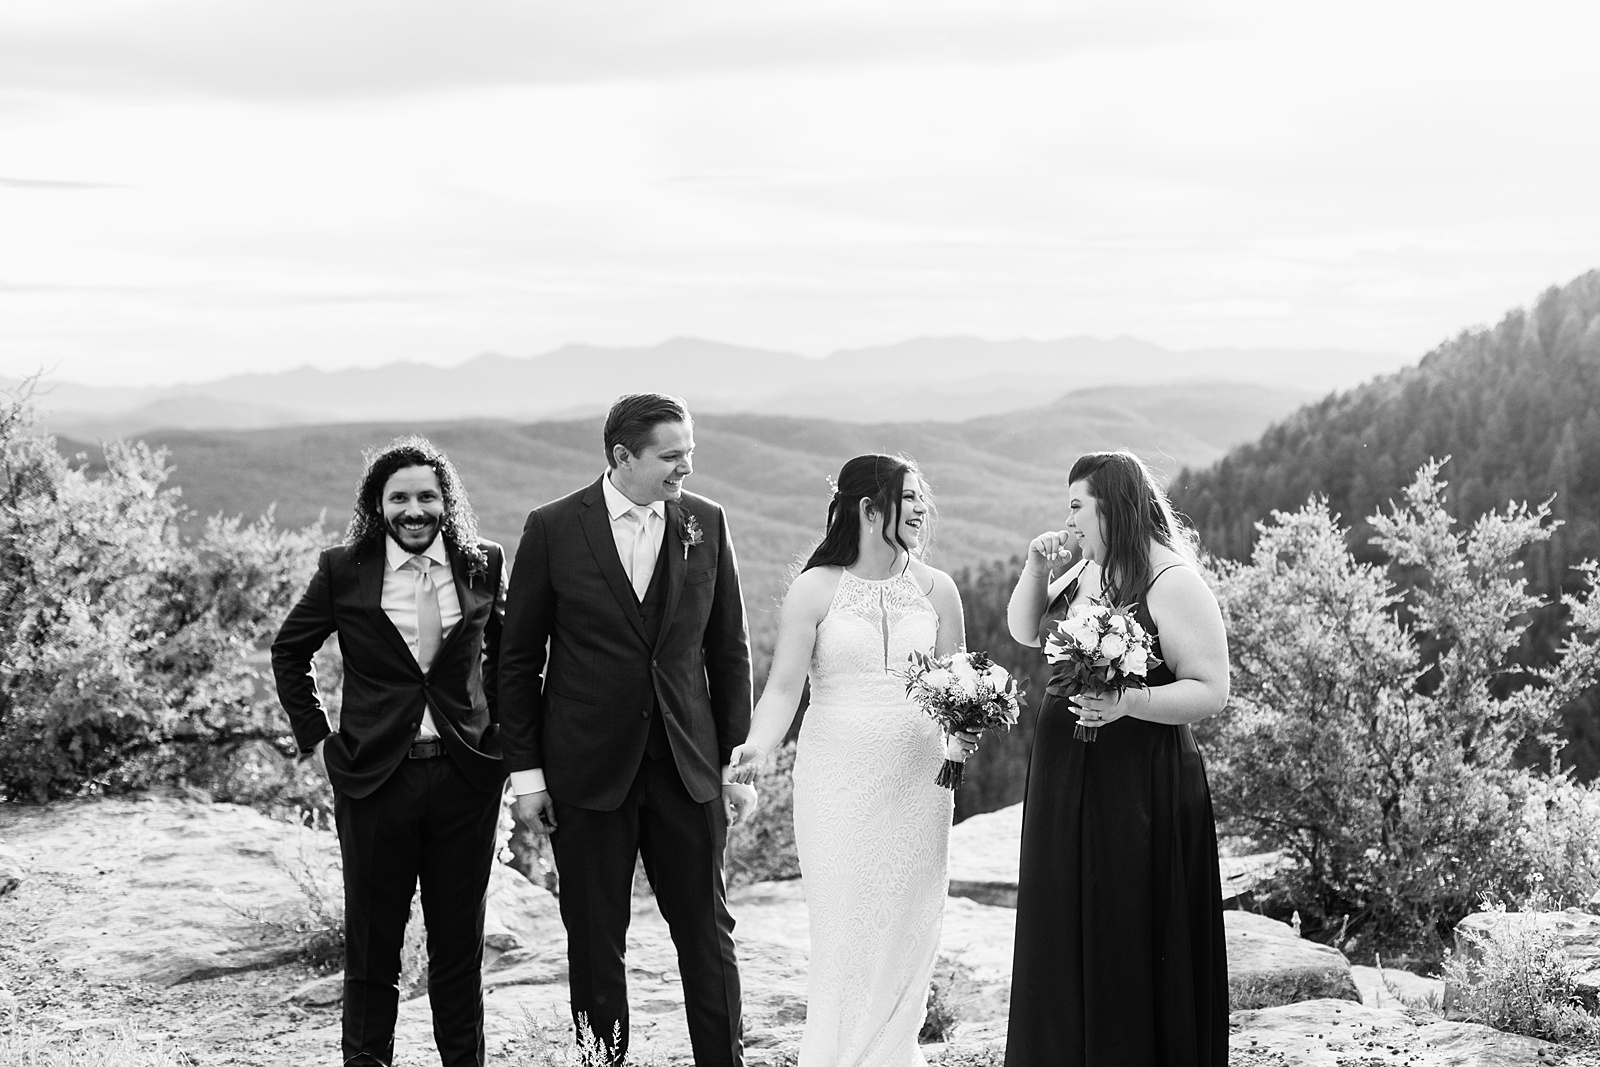 Bridal party laughing together at Mogollon Rim elopement by Payson intimate elopement photographer Juniper and Co Photography.